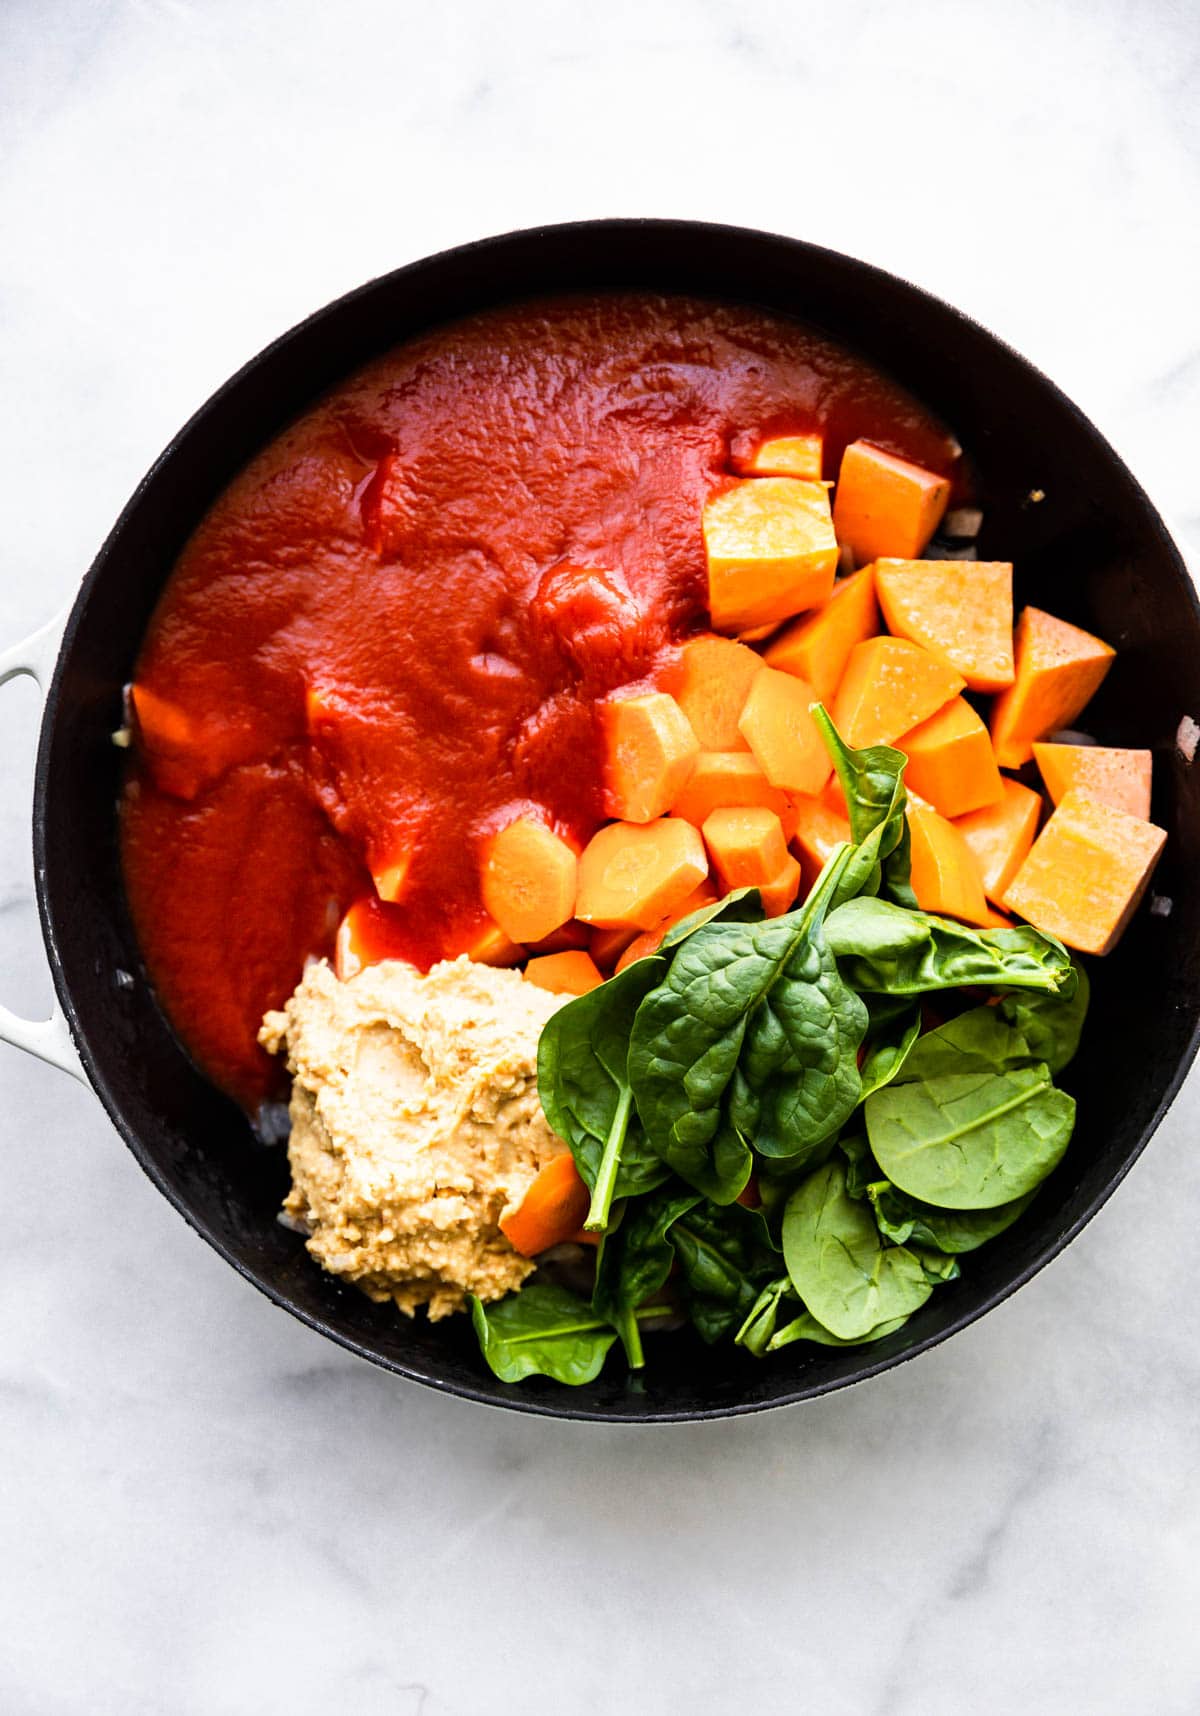 overhead photo: tomato sauce, spinach leaves and chunks of sweet potato in black pot